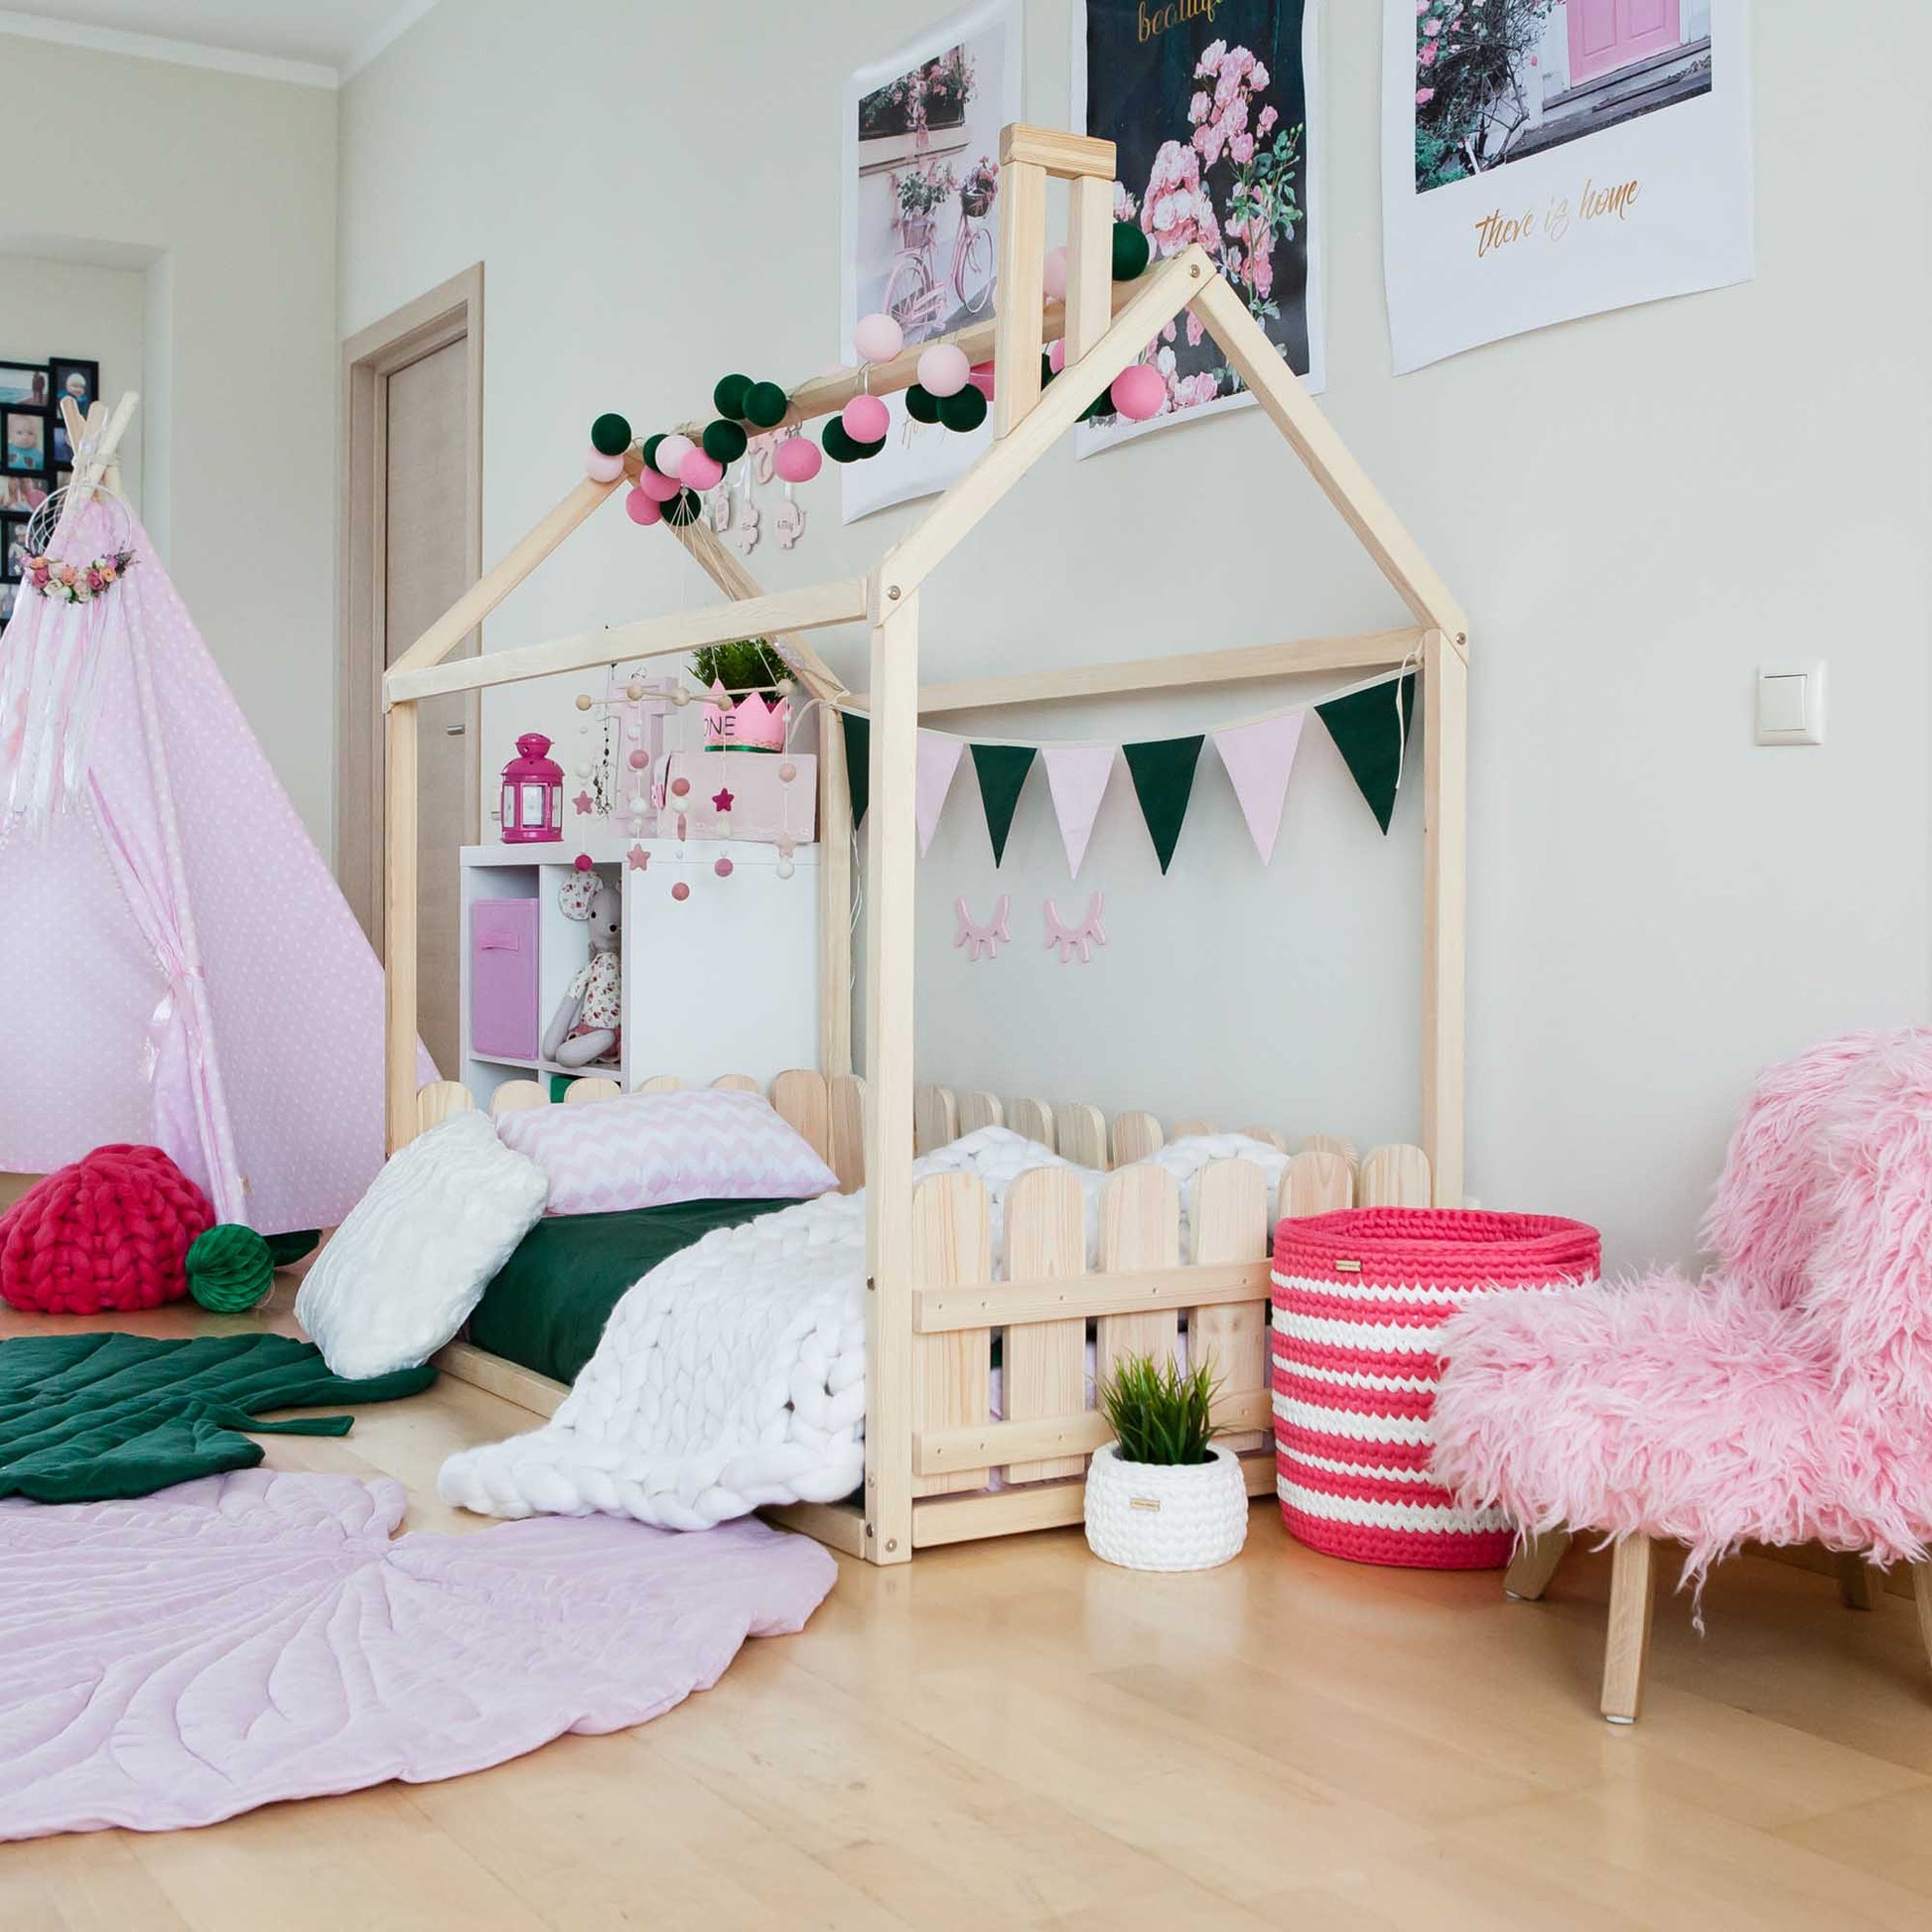 A girl's room with a pink montessori house bed and a pink teepee is now a girl's room with a pink floor house-frame bed with 3-sided picket fence rails and a pink teepee.